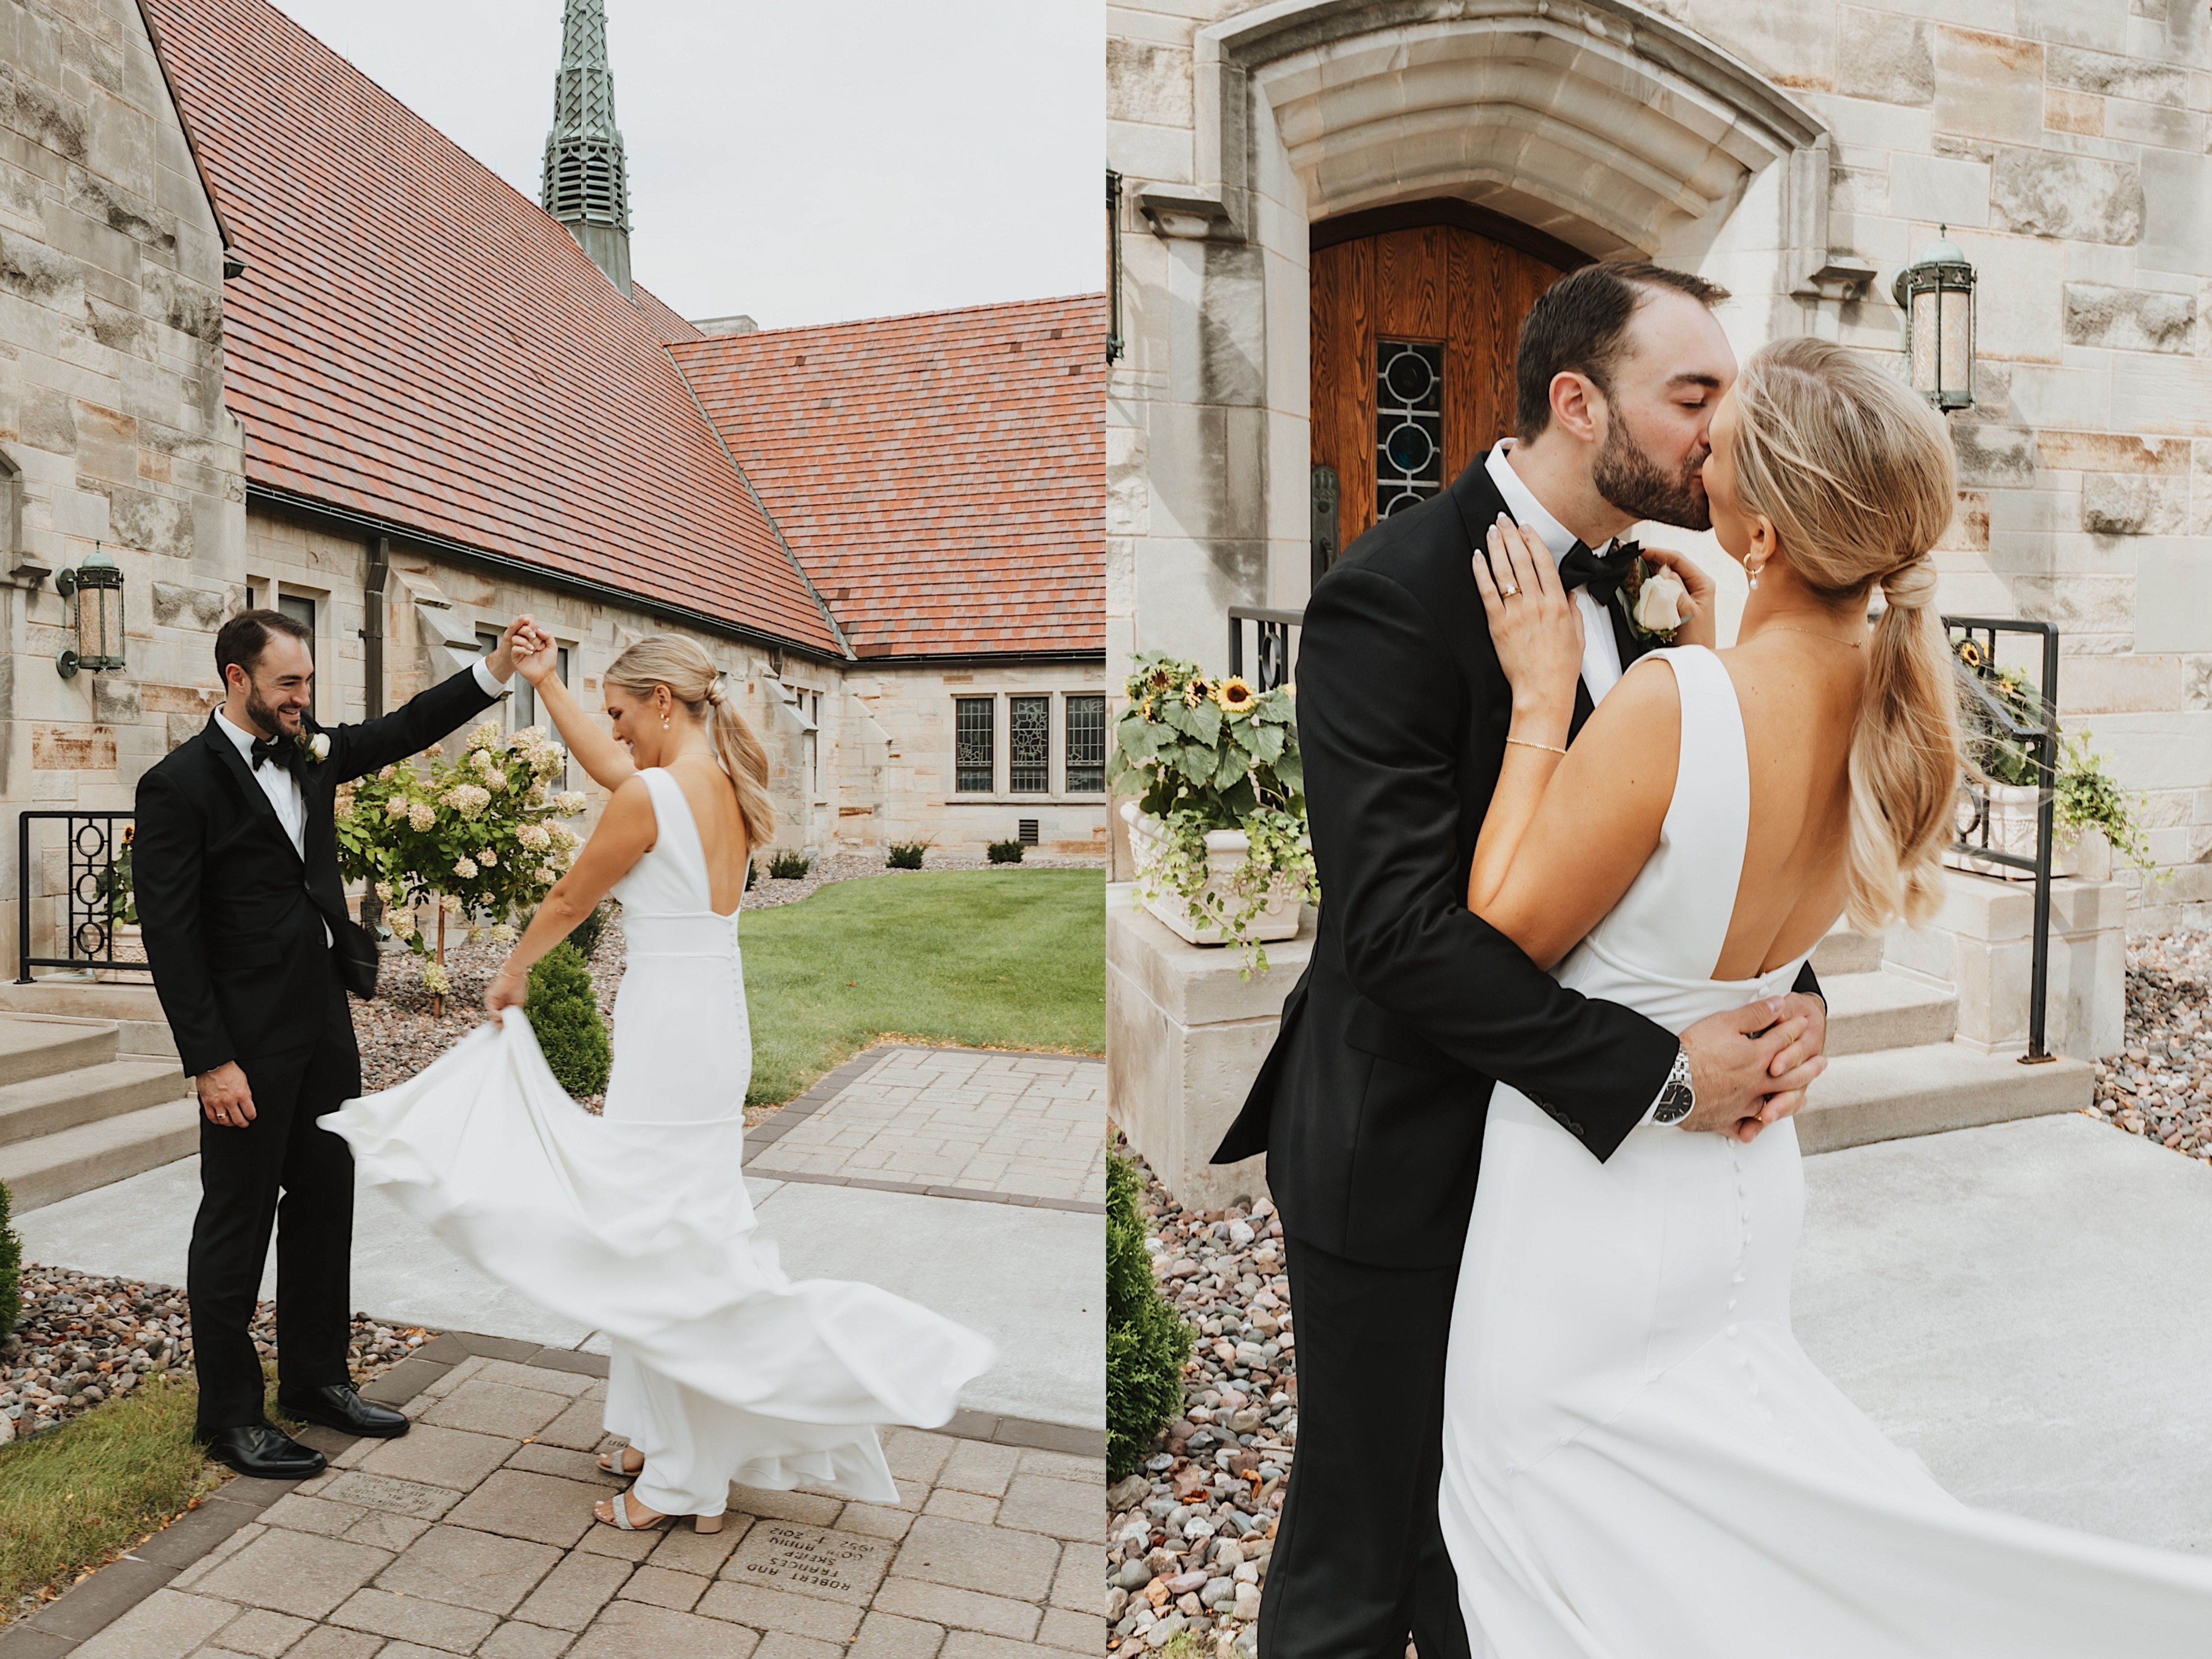 2 photos side by side, the left is of a groom smiling as he spins the bride, the right is of the bride and groom kissing one another